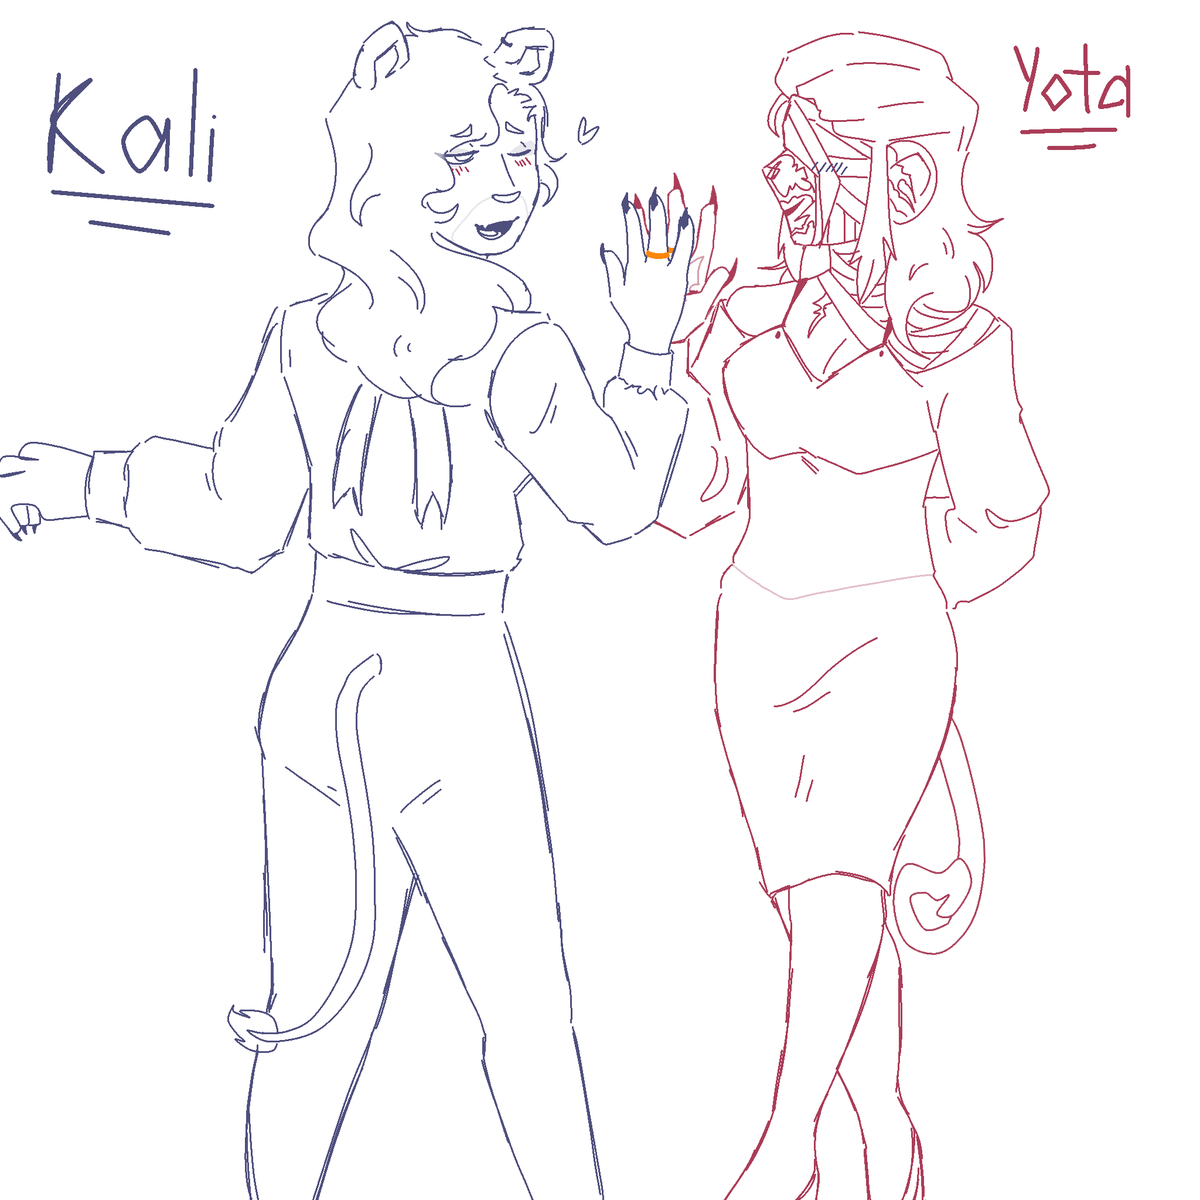 OMG A YOTA X KALI POST? My sweeties <3 (w them seperated and w them together and w their wedding rings!) 
#런애니 #Yota